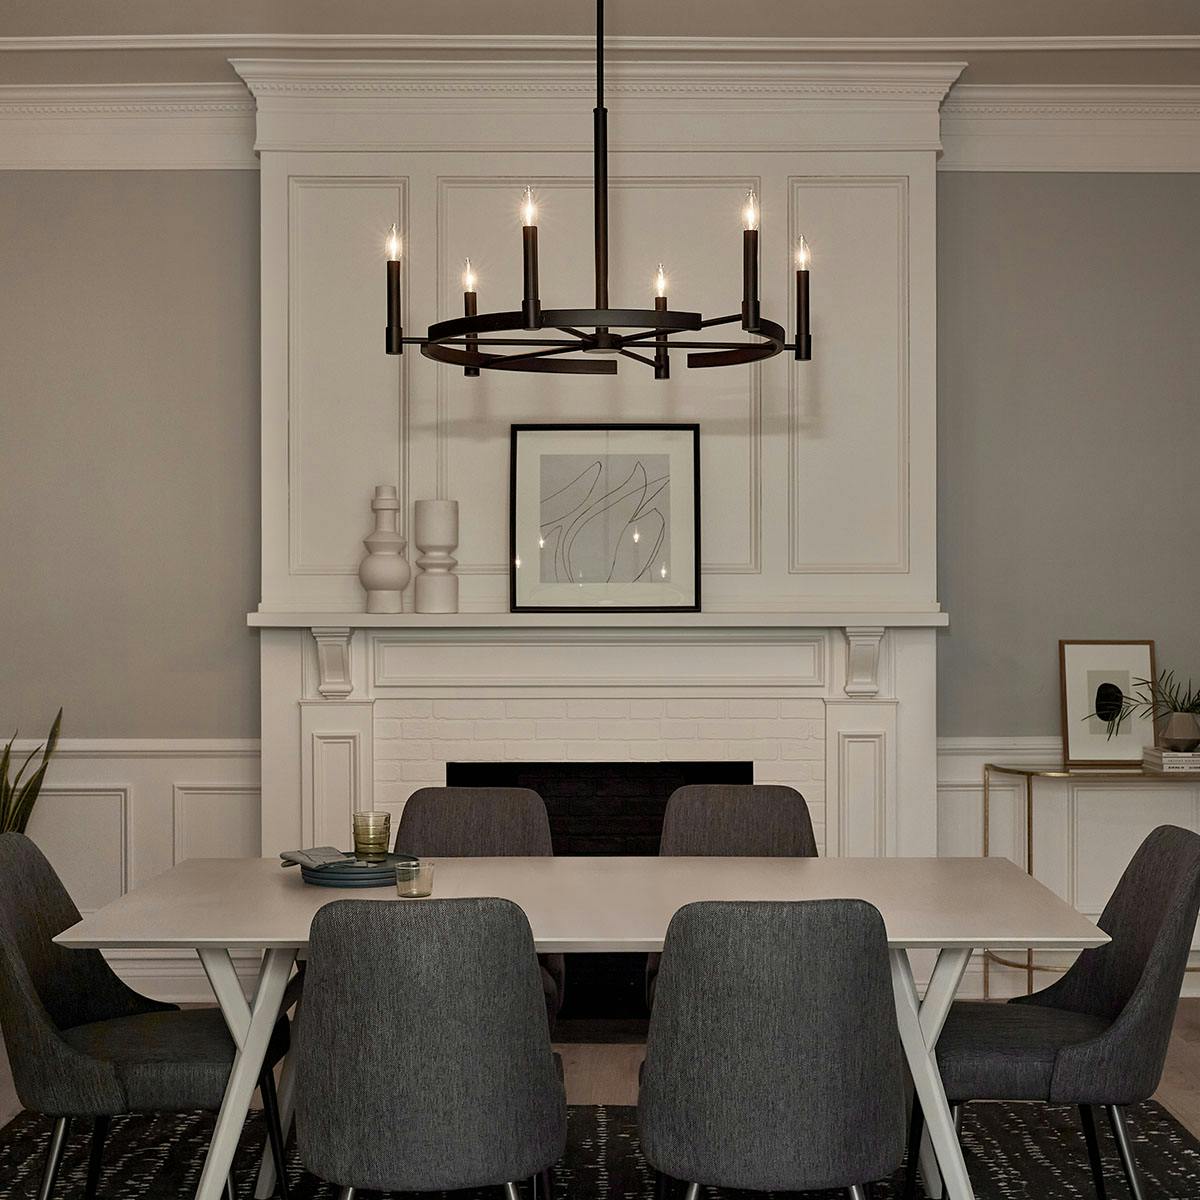 Night time Dining Room image featuring Tolani chandelier 52427BK